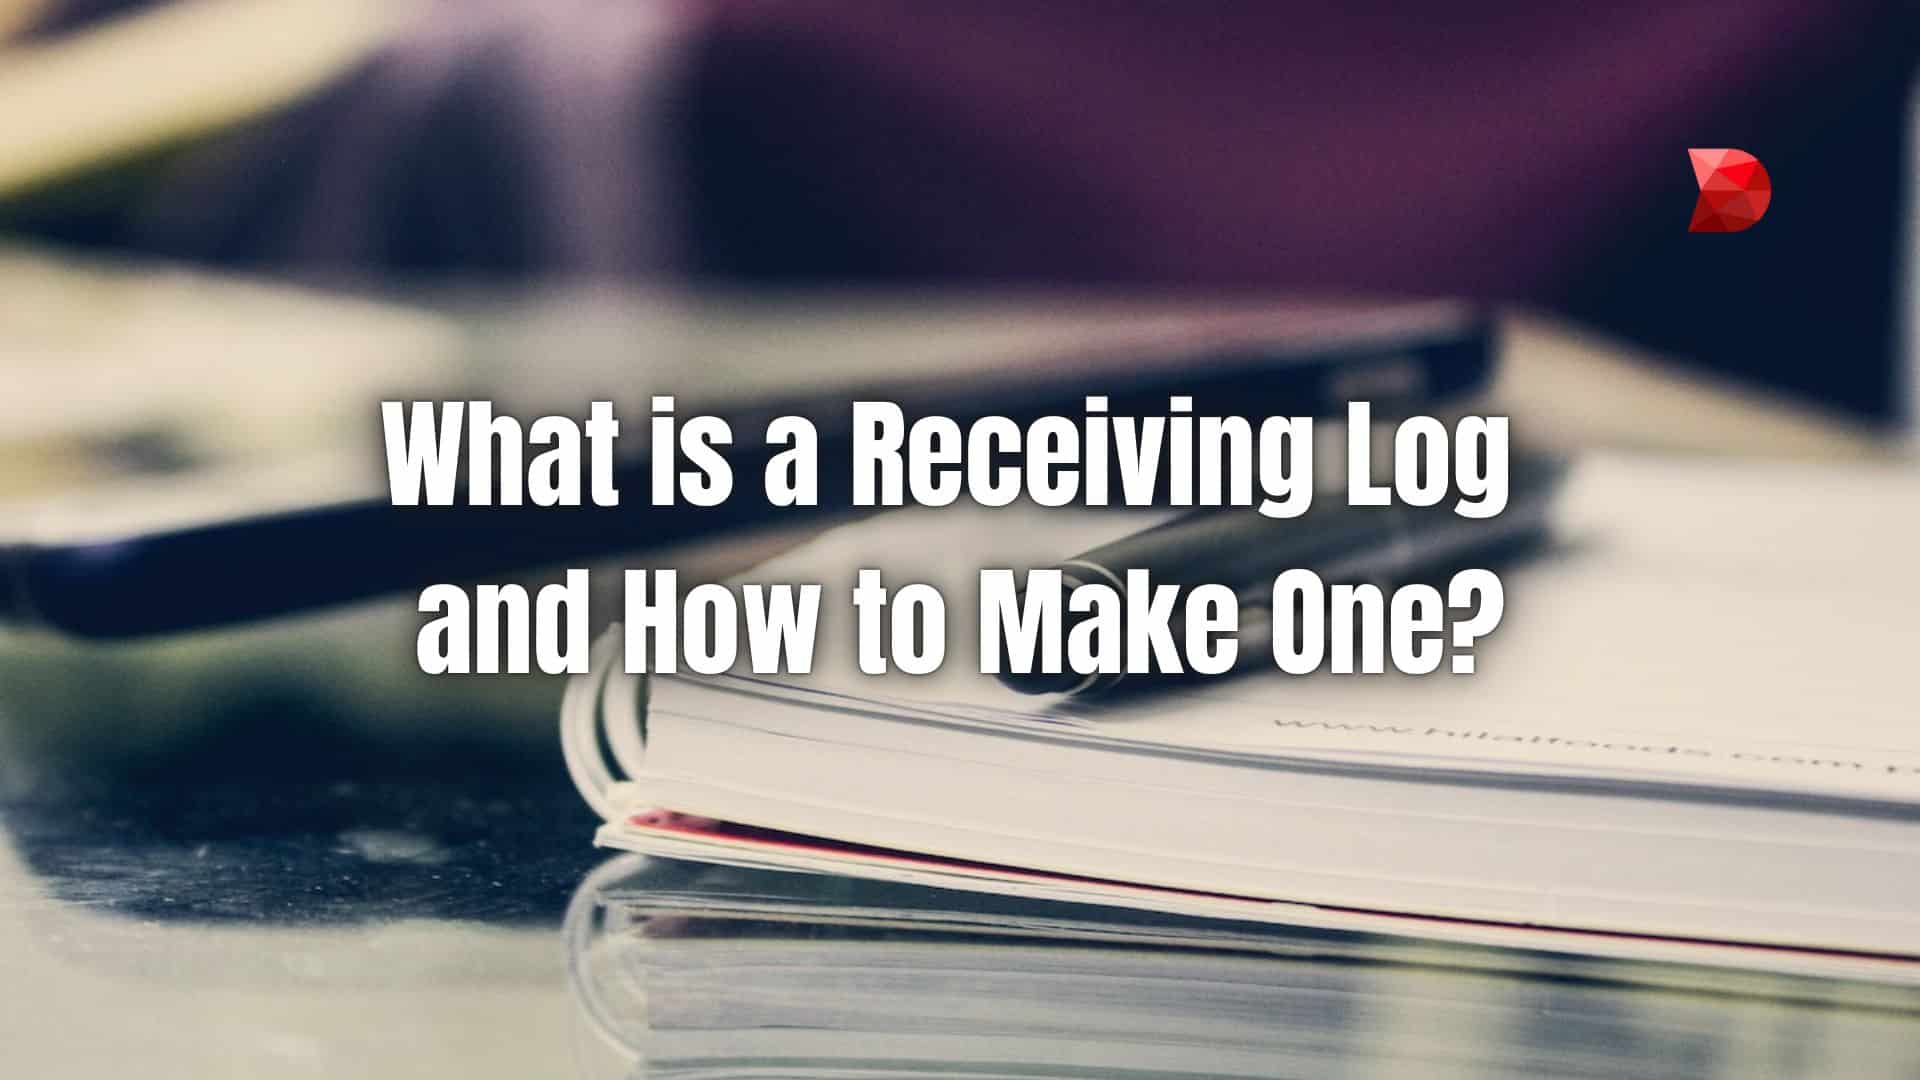 What is a Receiving Log and How to Make One